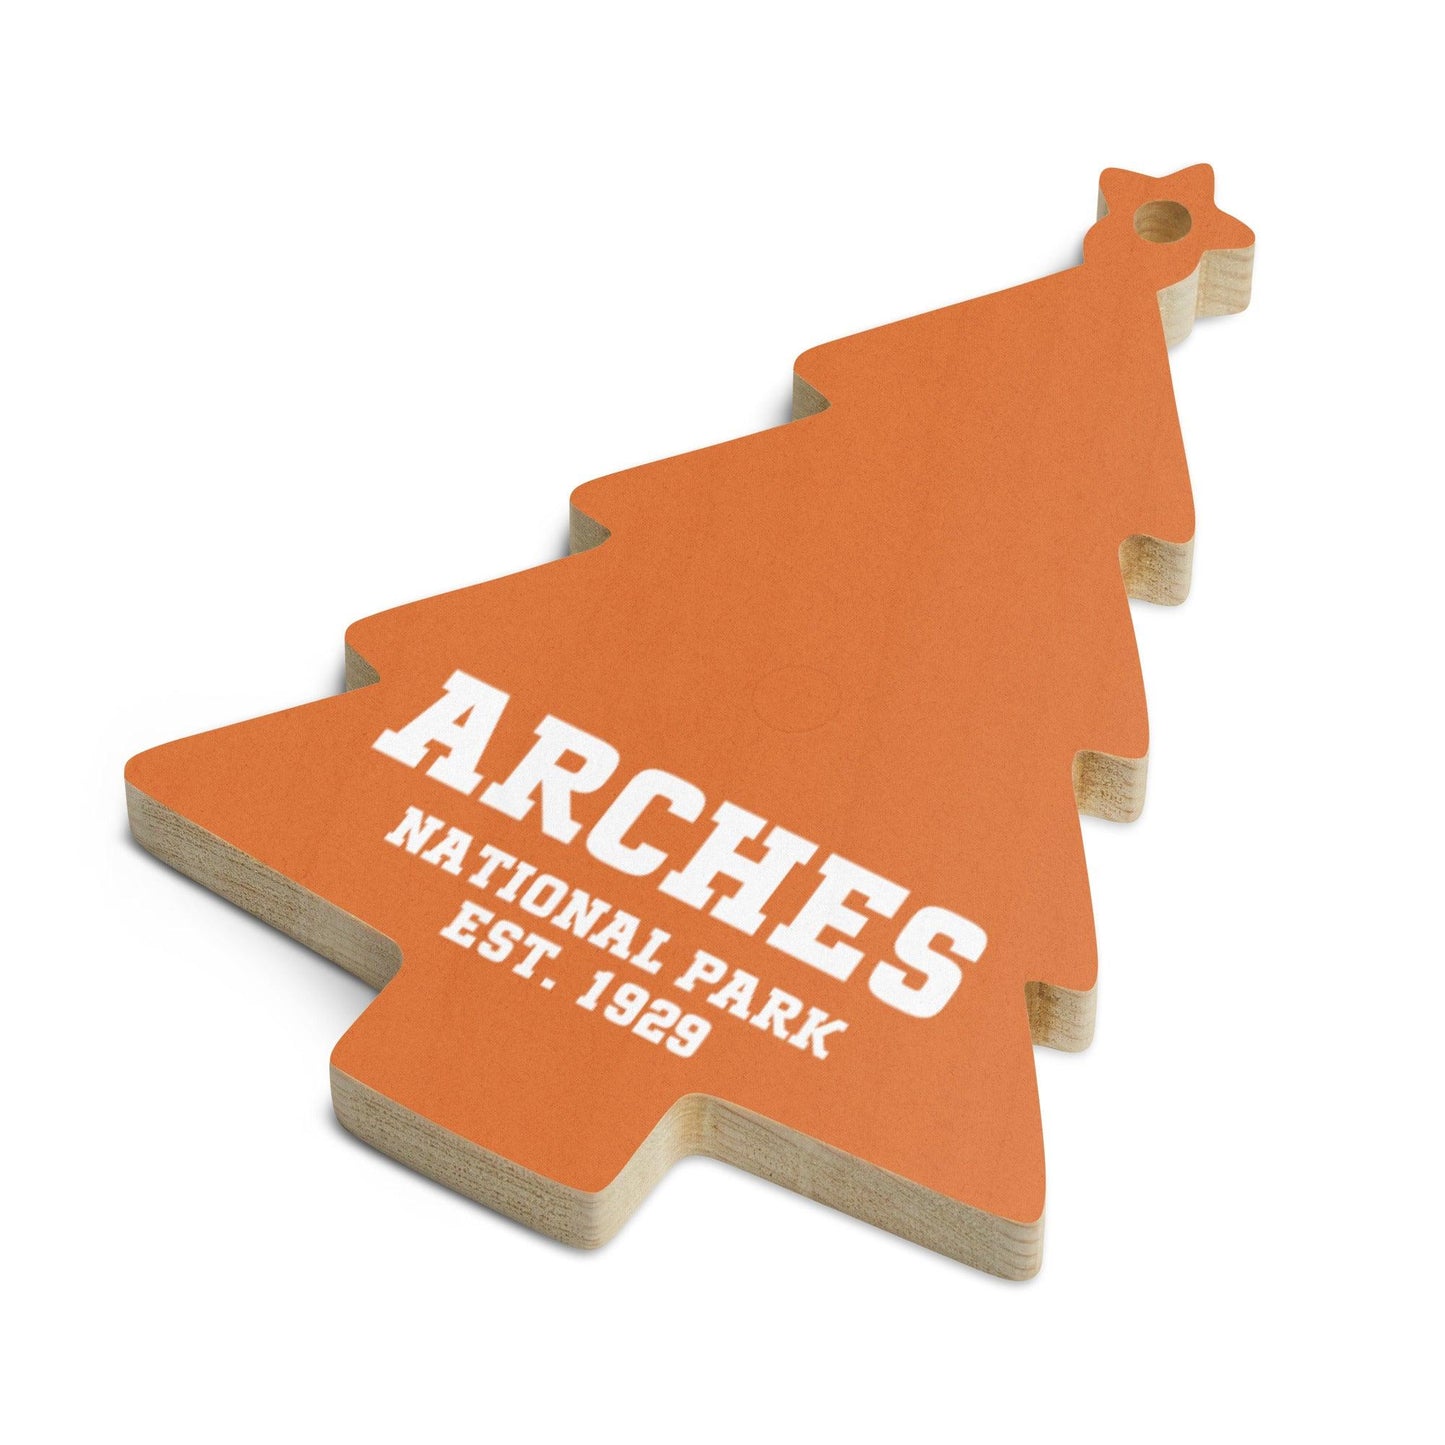 Arches National Park Wooden Ornament - Adventure Threads Company